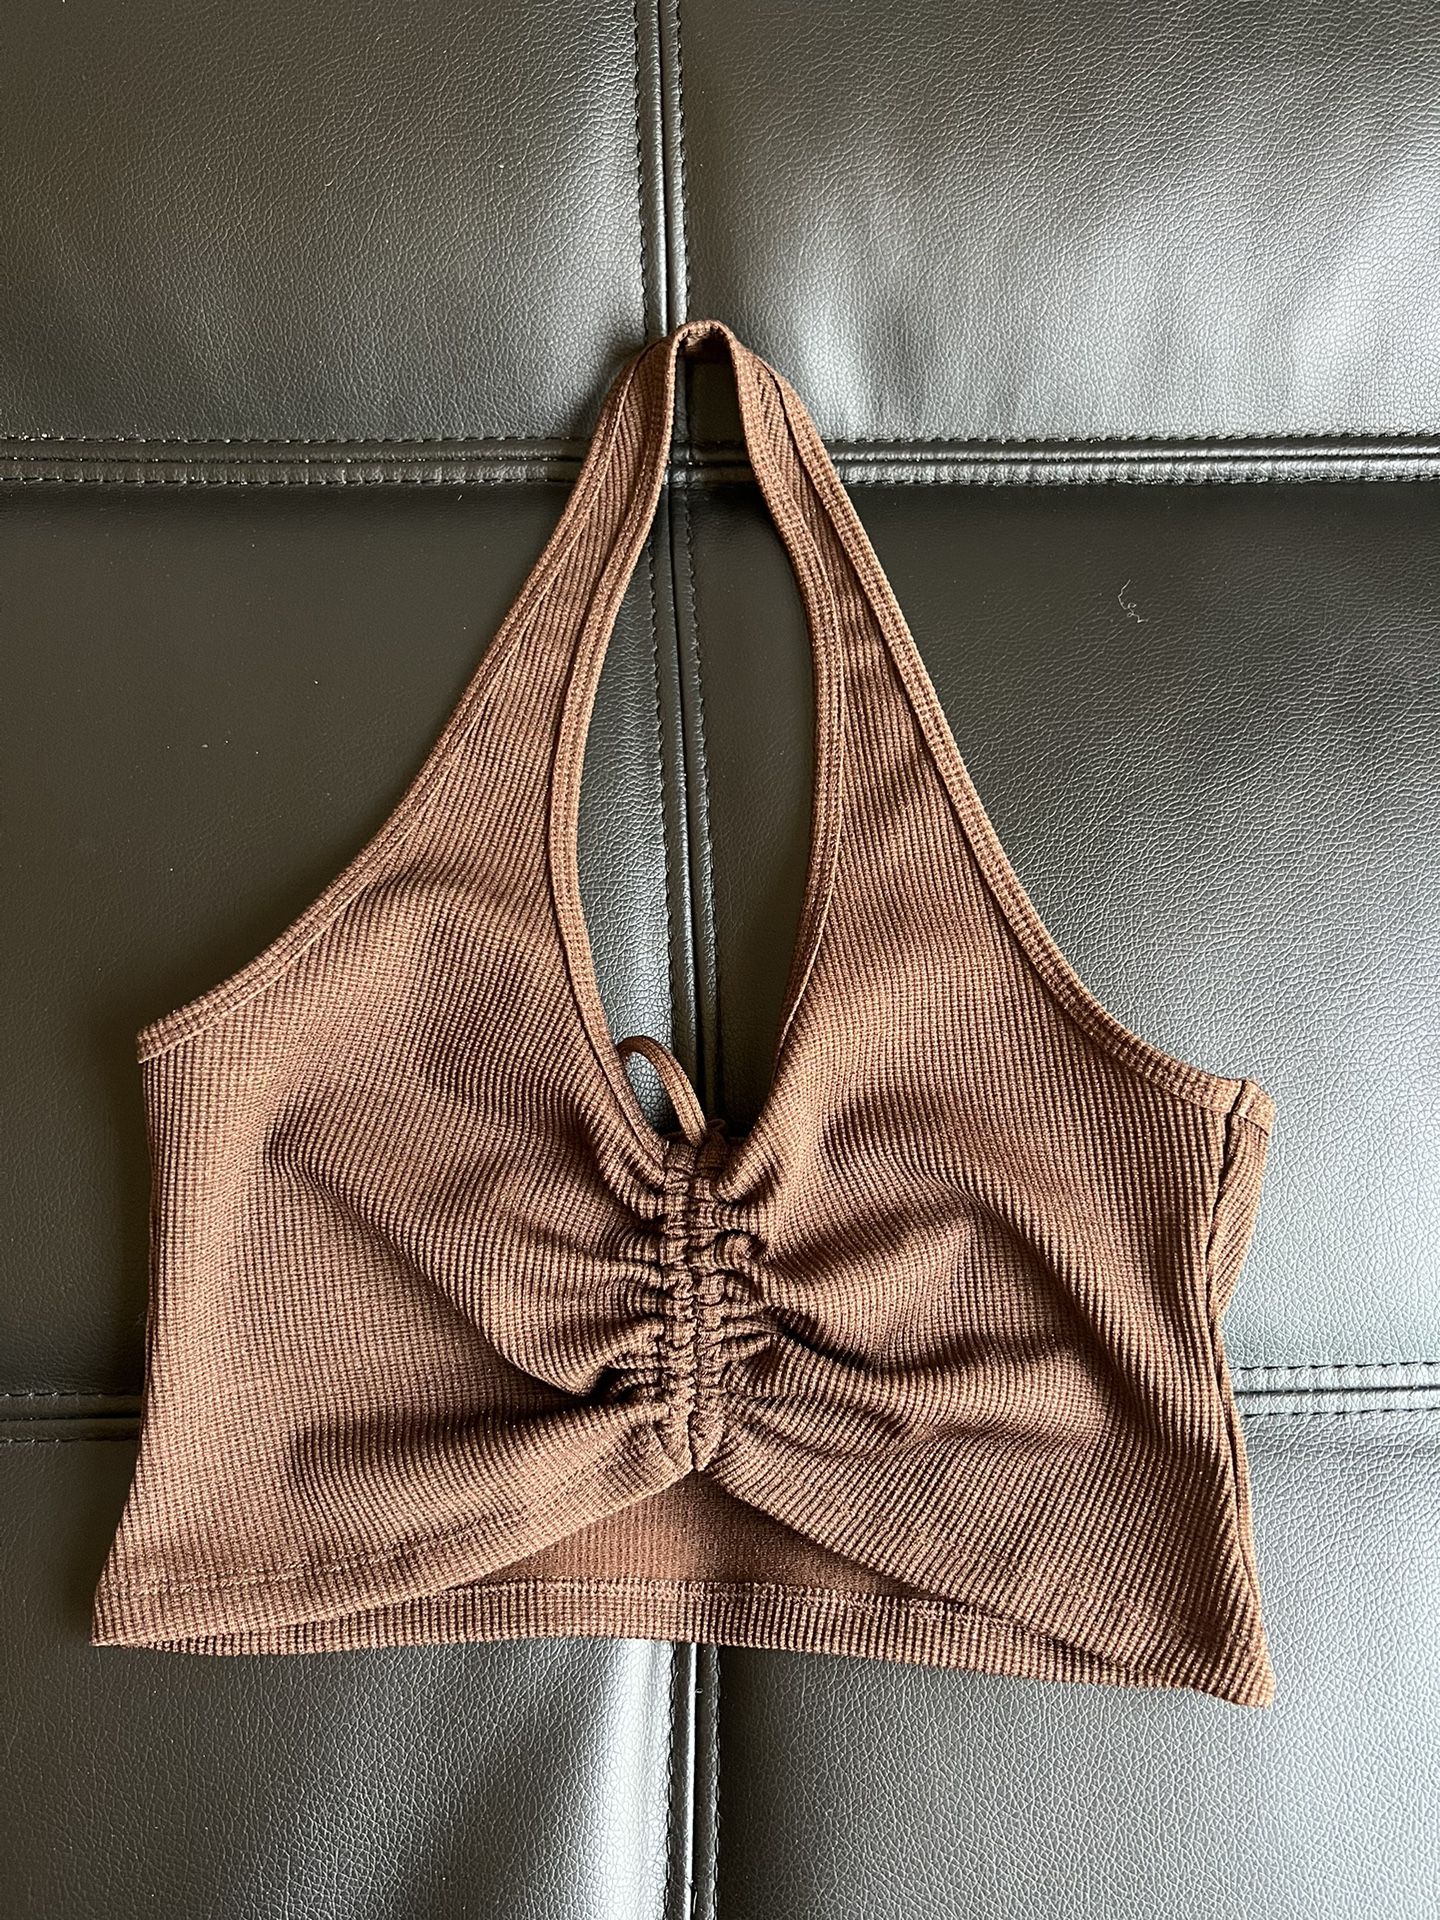 super cute halter tops ! h&m 2 for $6